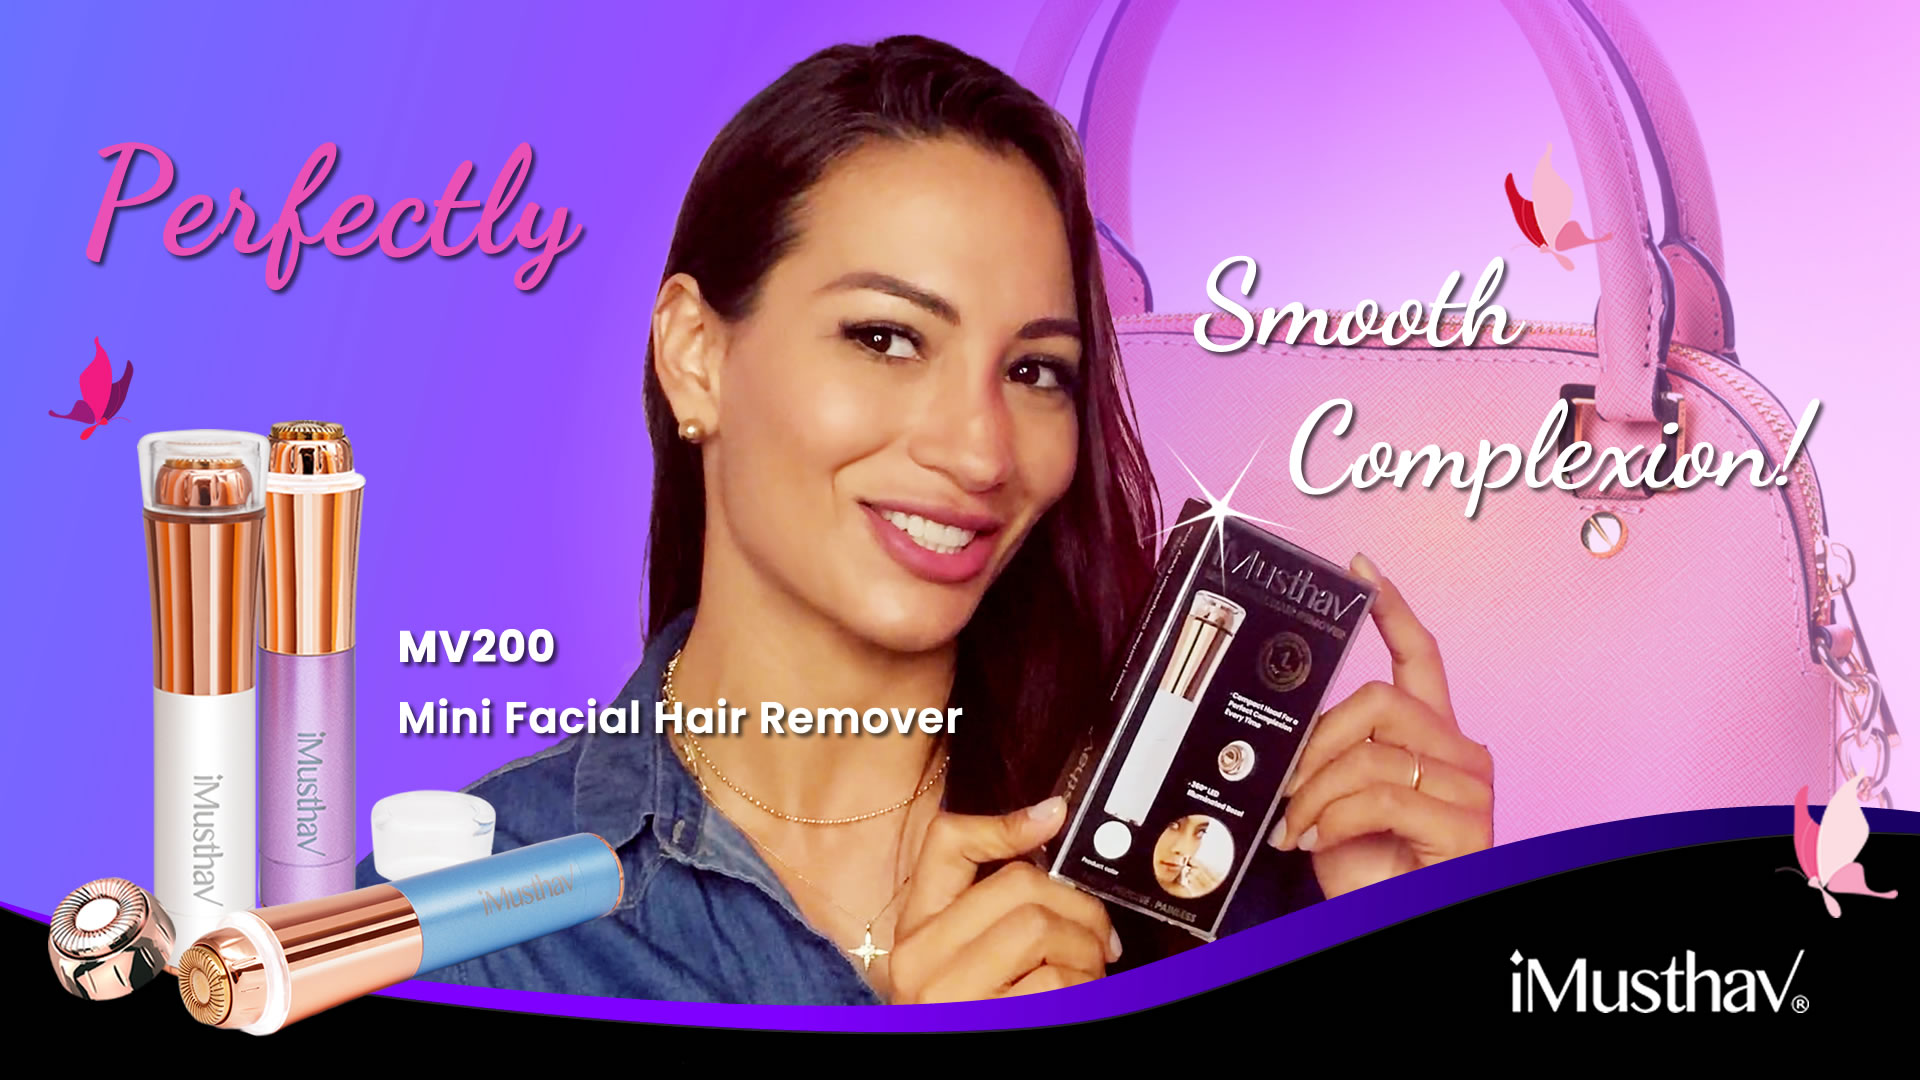 You are currently viewing iMusthav® Mini Facial Hair Remover MV200 | REVIEW & DEMO | Spanish with English Subtitle